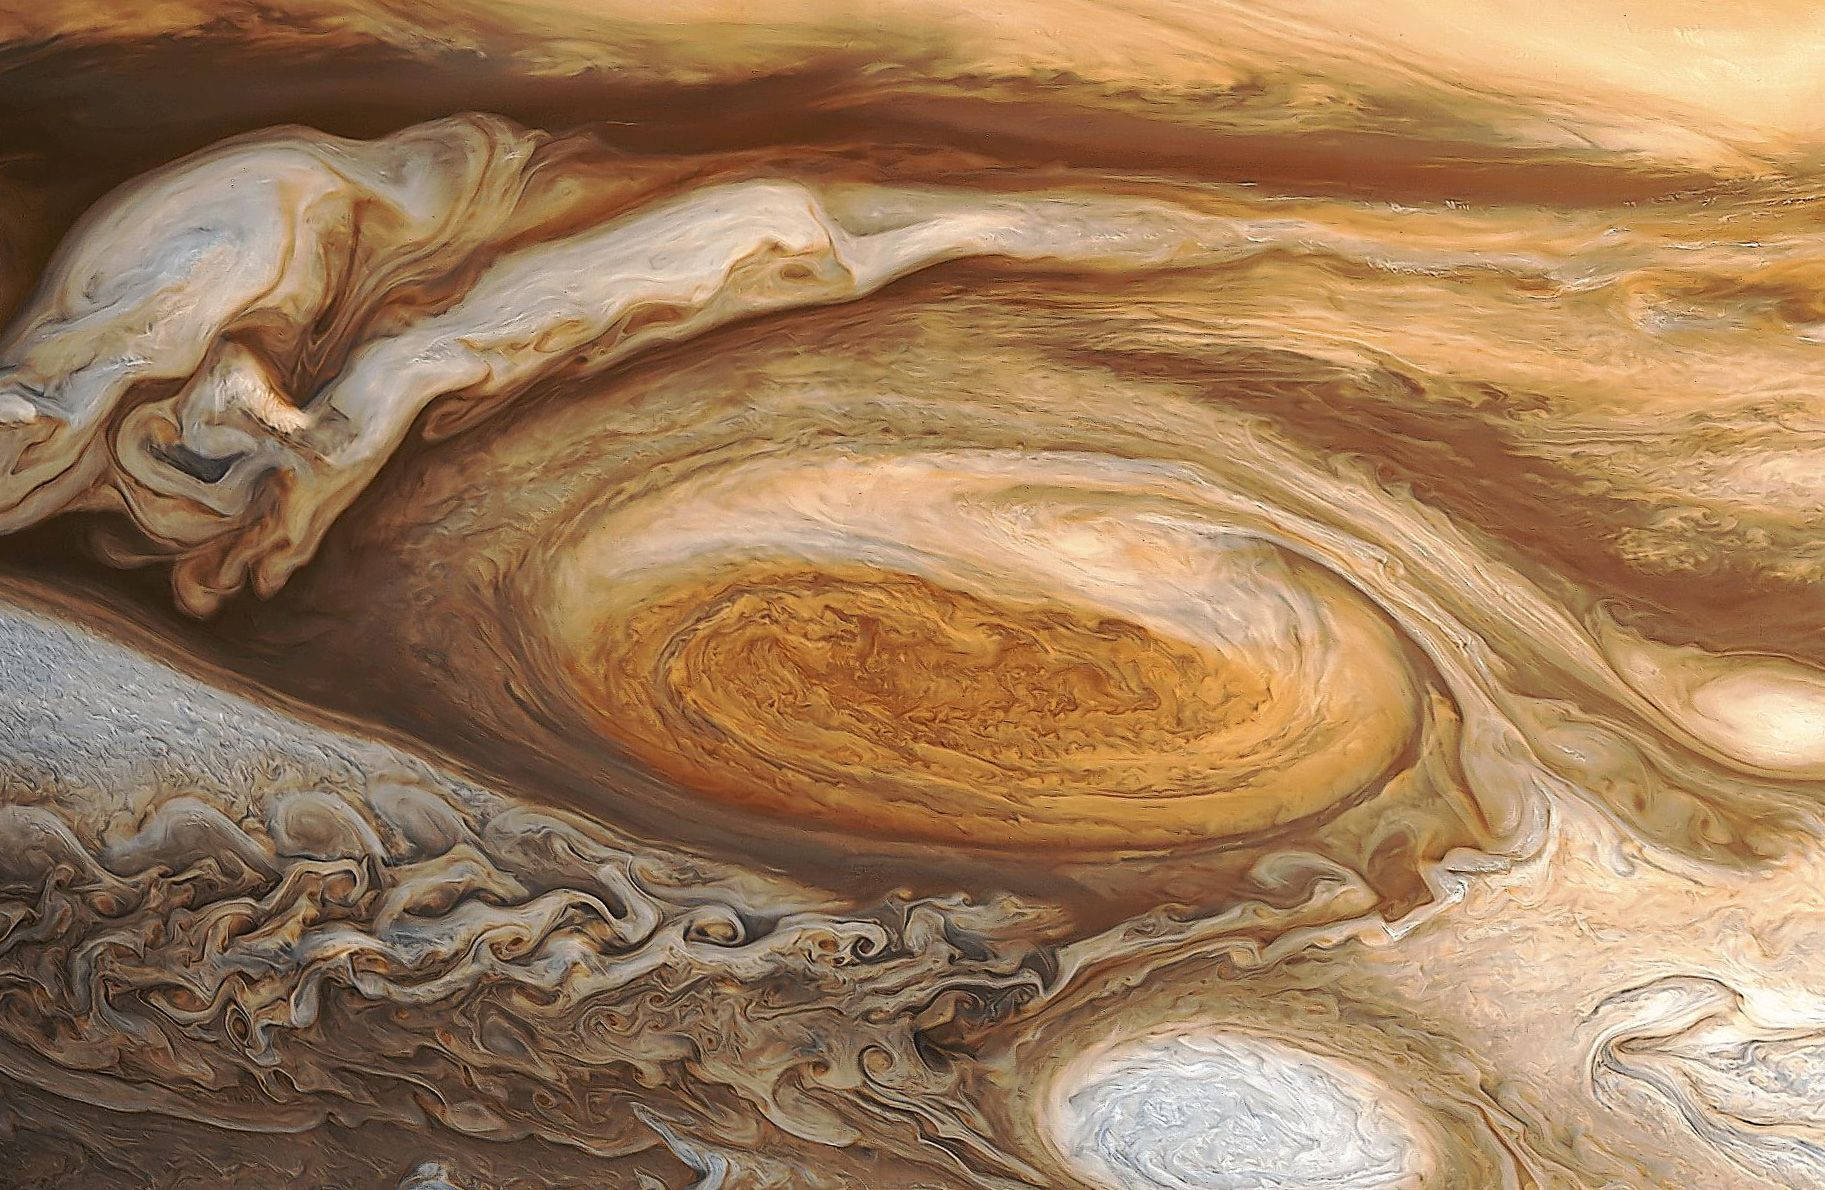 Jupiter and its Great Red Spot Wallpaper